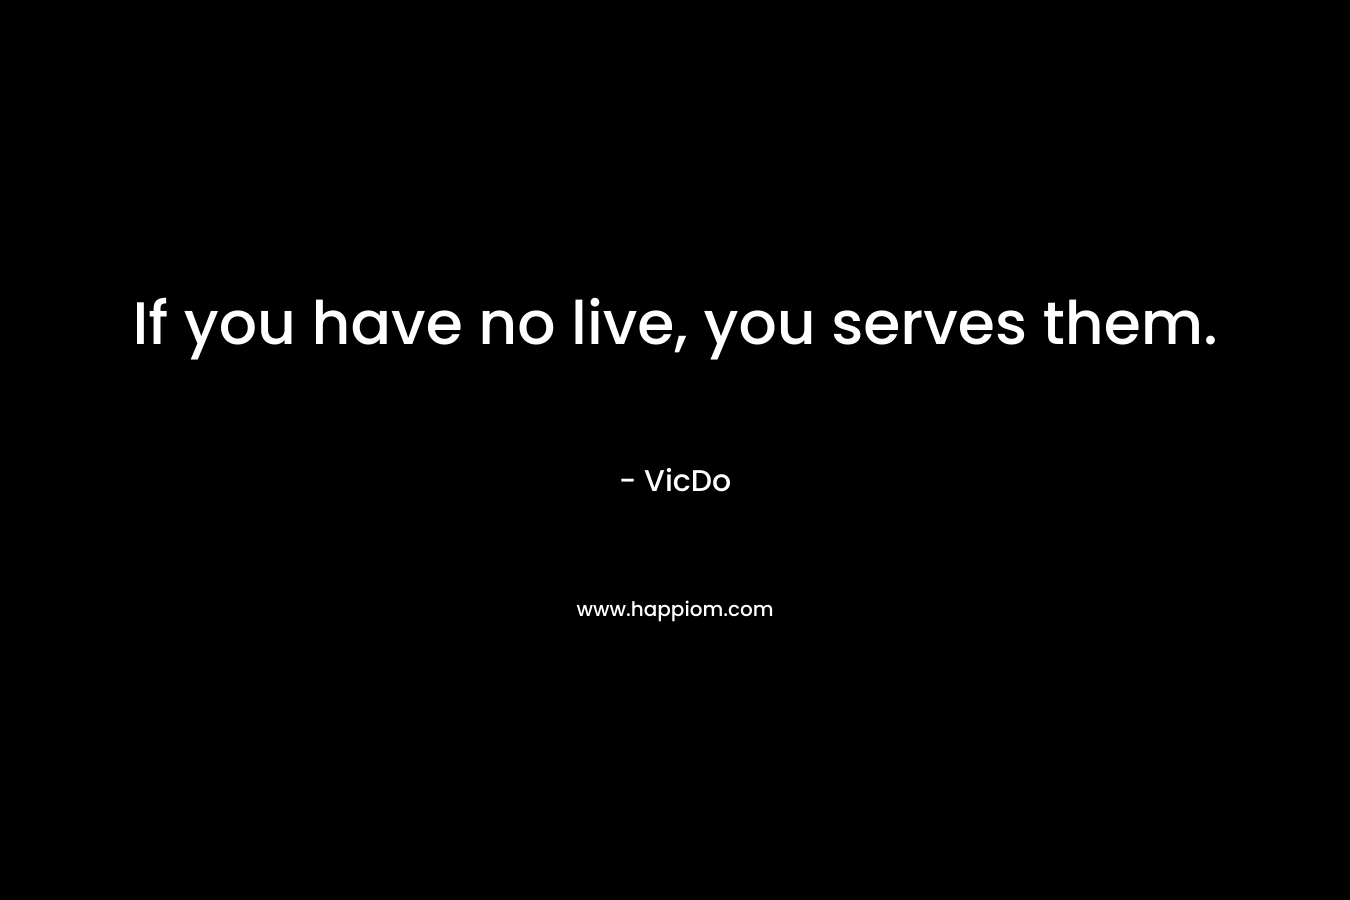 If you have no live, you serves them.